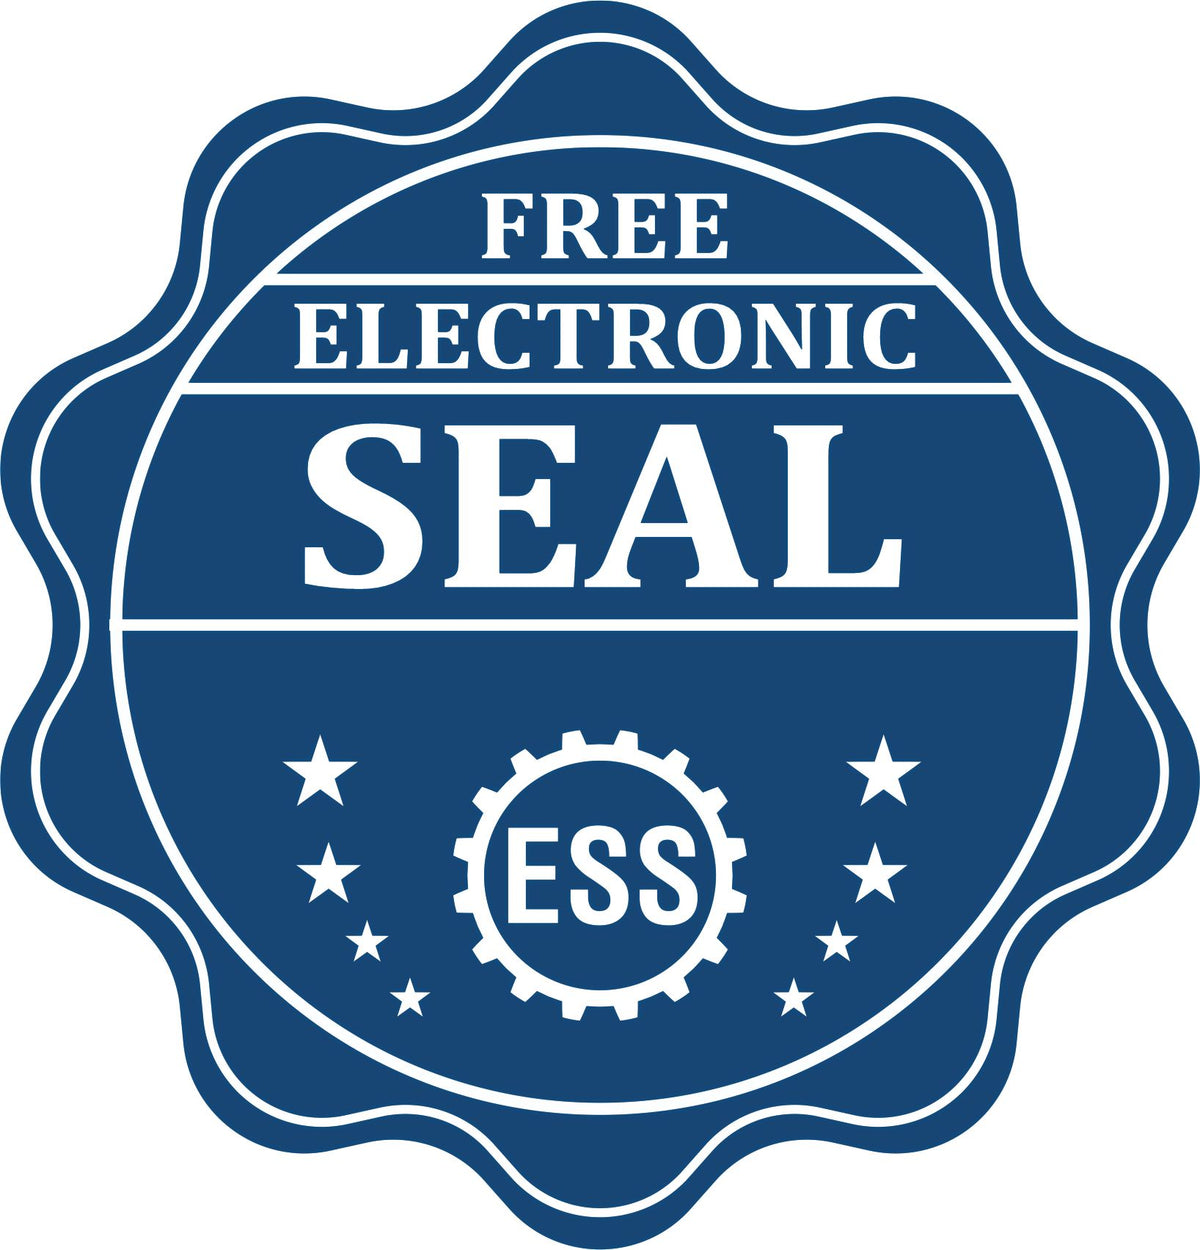 A badge showing a free electronic seal for the State of Virginia Long Reach Architectural Embossing Seal with stars and the ESS gear on the emblem.